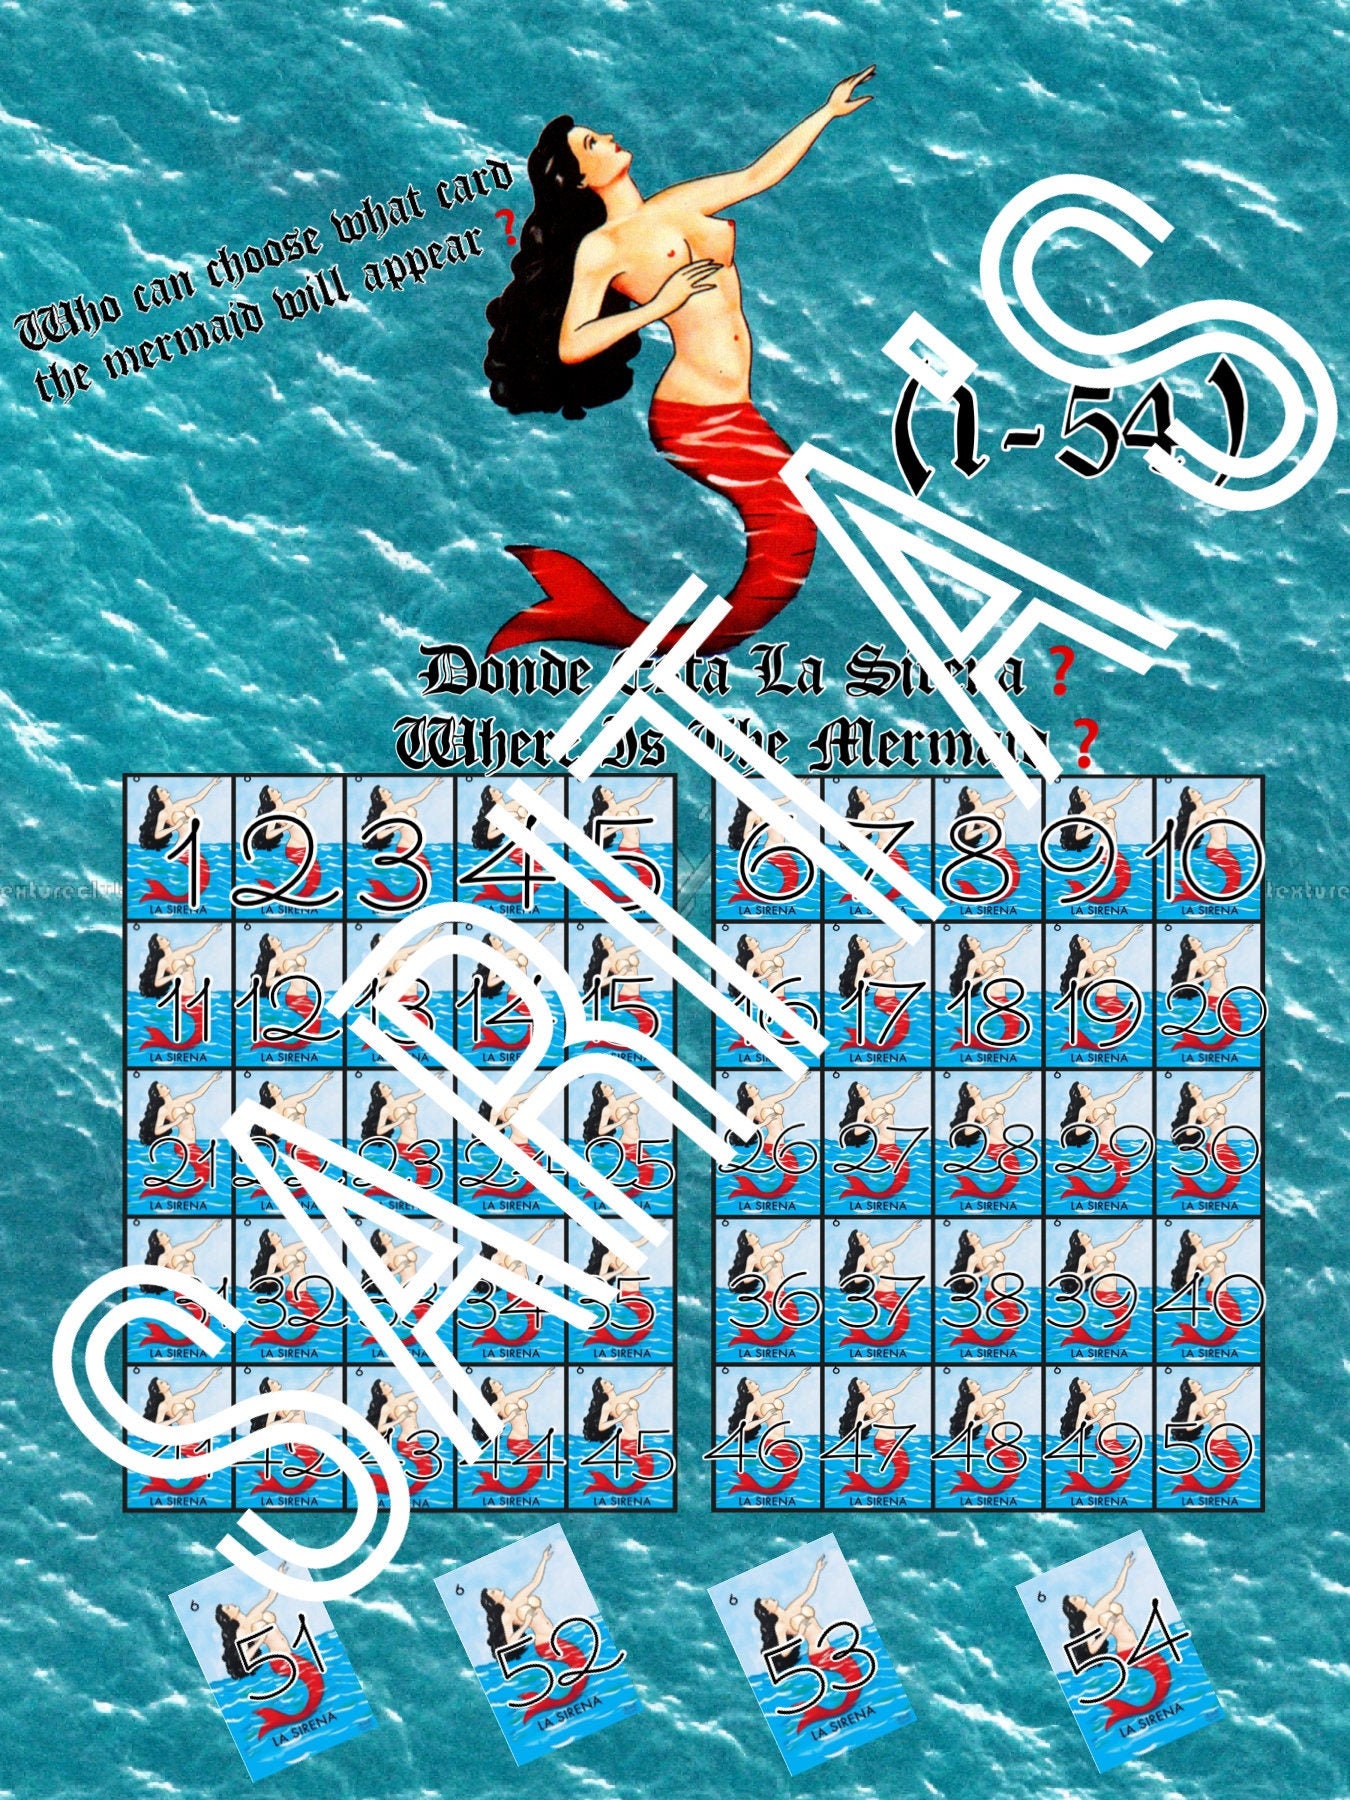 LA SIRENA LOTERIA  Greeting Card for Sale by CasaLatina